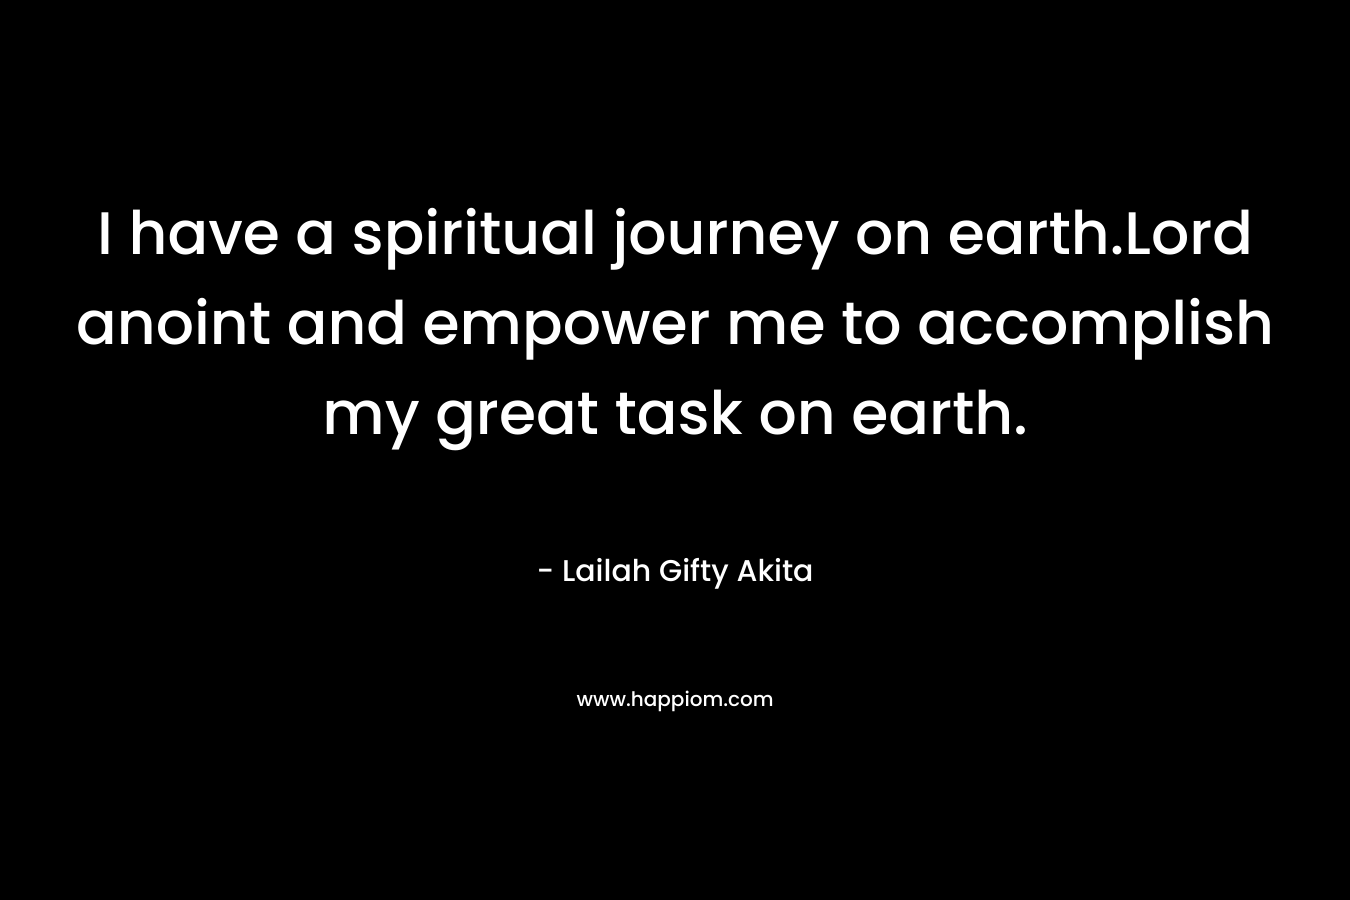 I have a spiritual journey on earth.Lord anoint and empower me to accomplish my great task on earth.